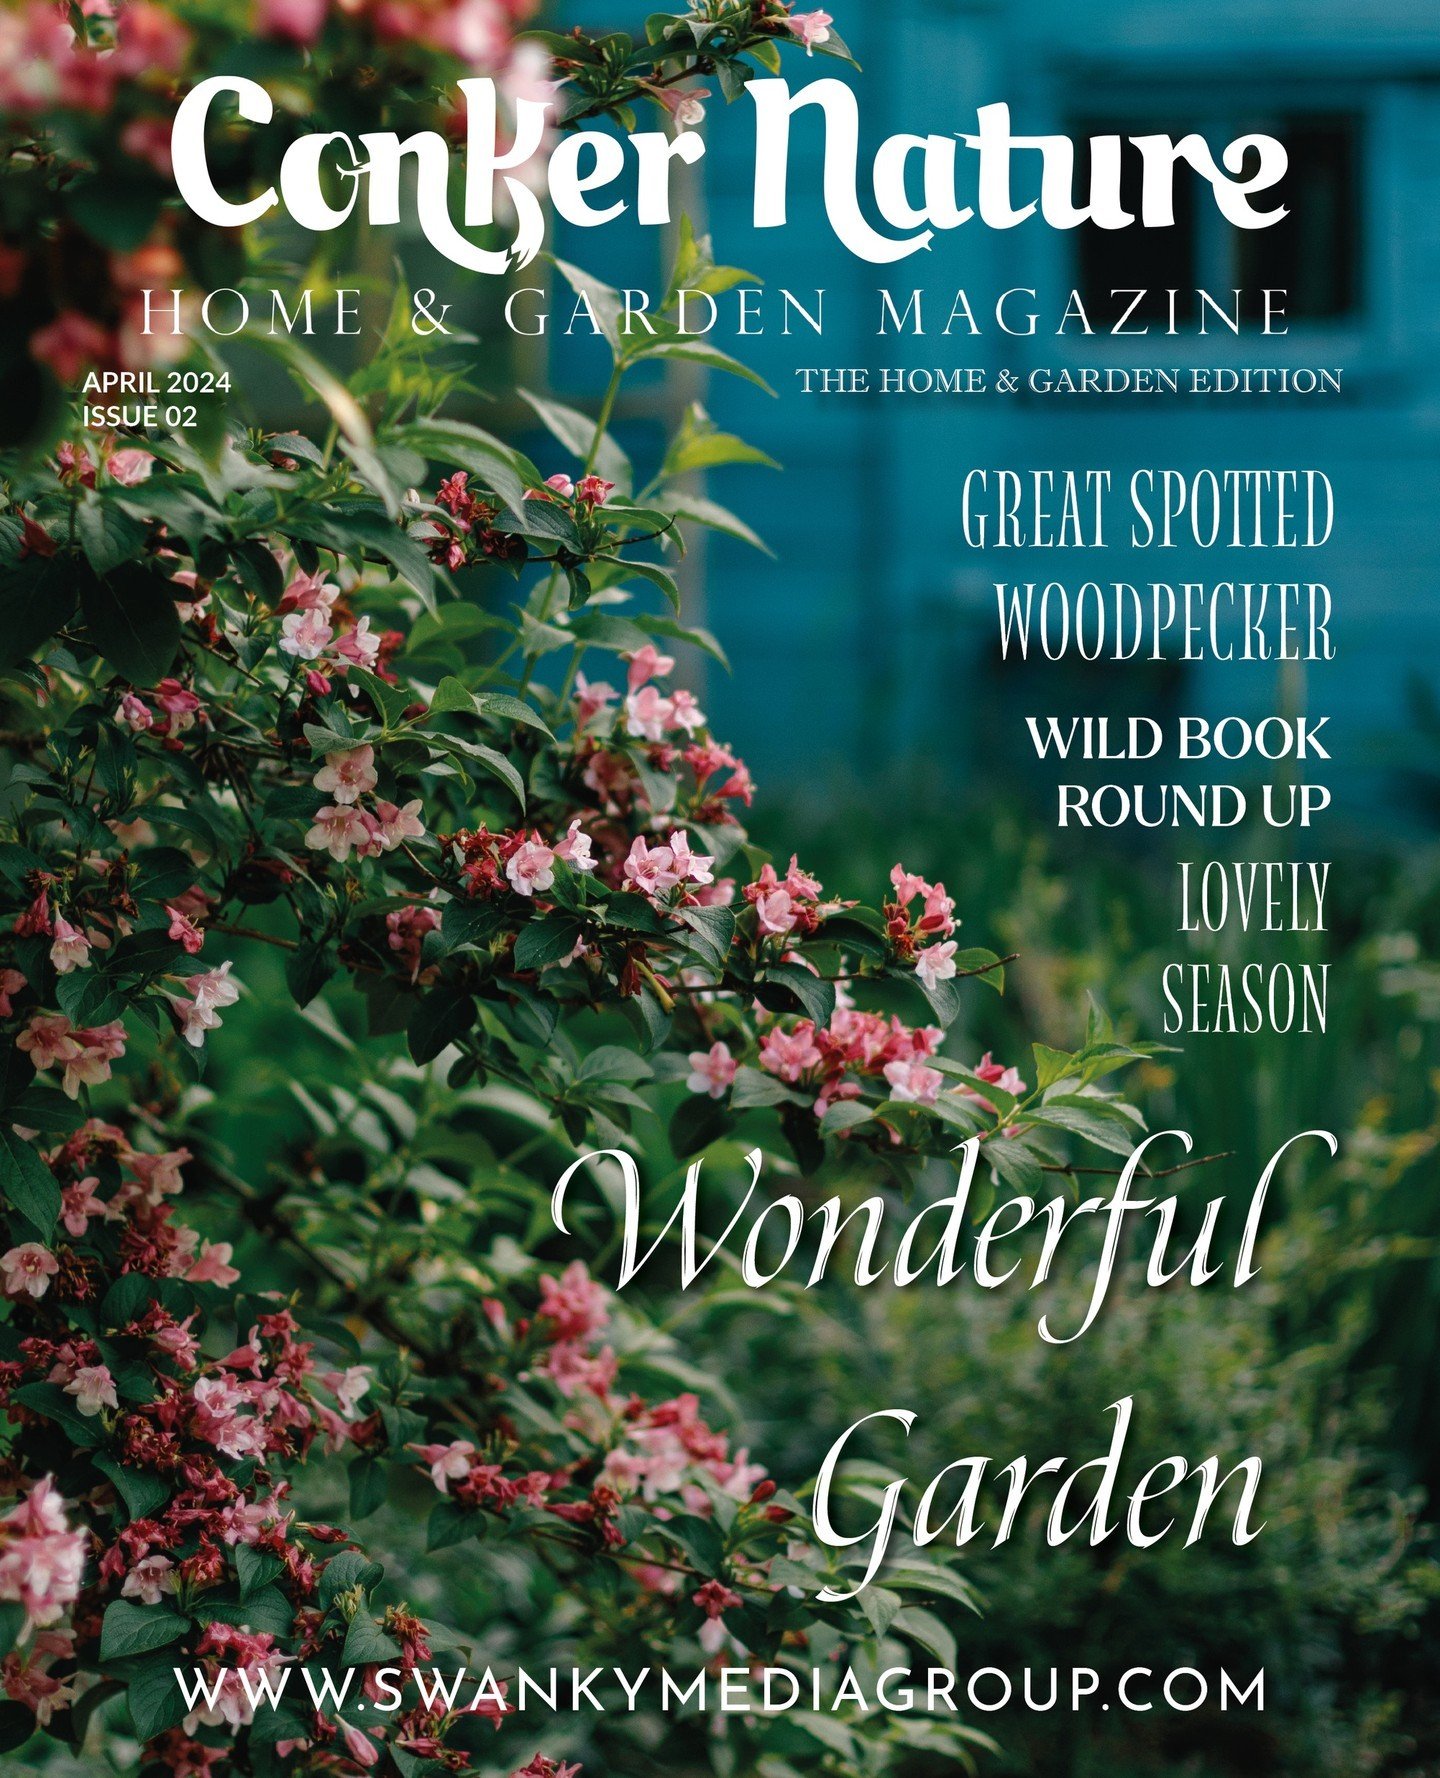 OUR APRIL 2024 HOME &amp; GARDEN ISSUE HAS ARRIVED 💙⁠
⁠
Conker Nature Magazine - April 2024: The Home and Garden Edition Issue 2⁠
⁠
This month our Editor-in-chief, Lucy Morris (@lucymorriswild), talks about this month&rsquo;s issue theme - gardening